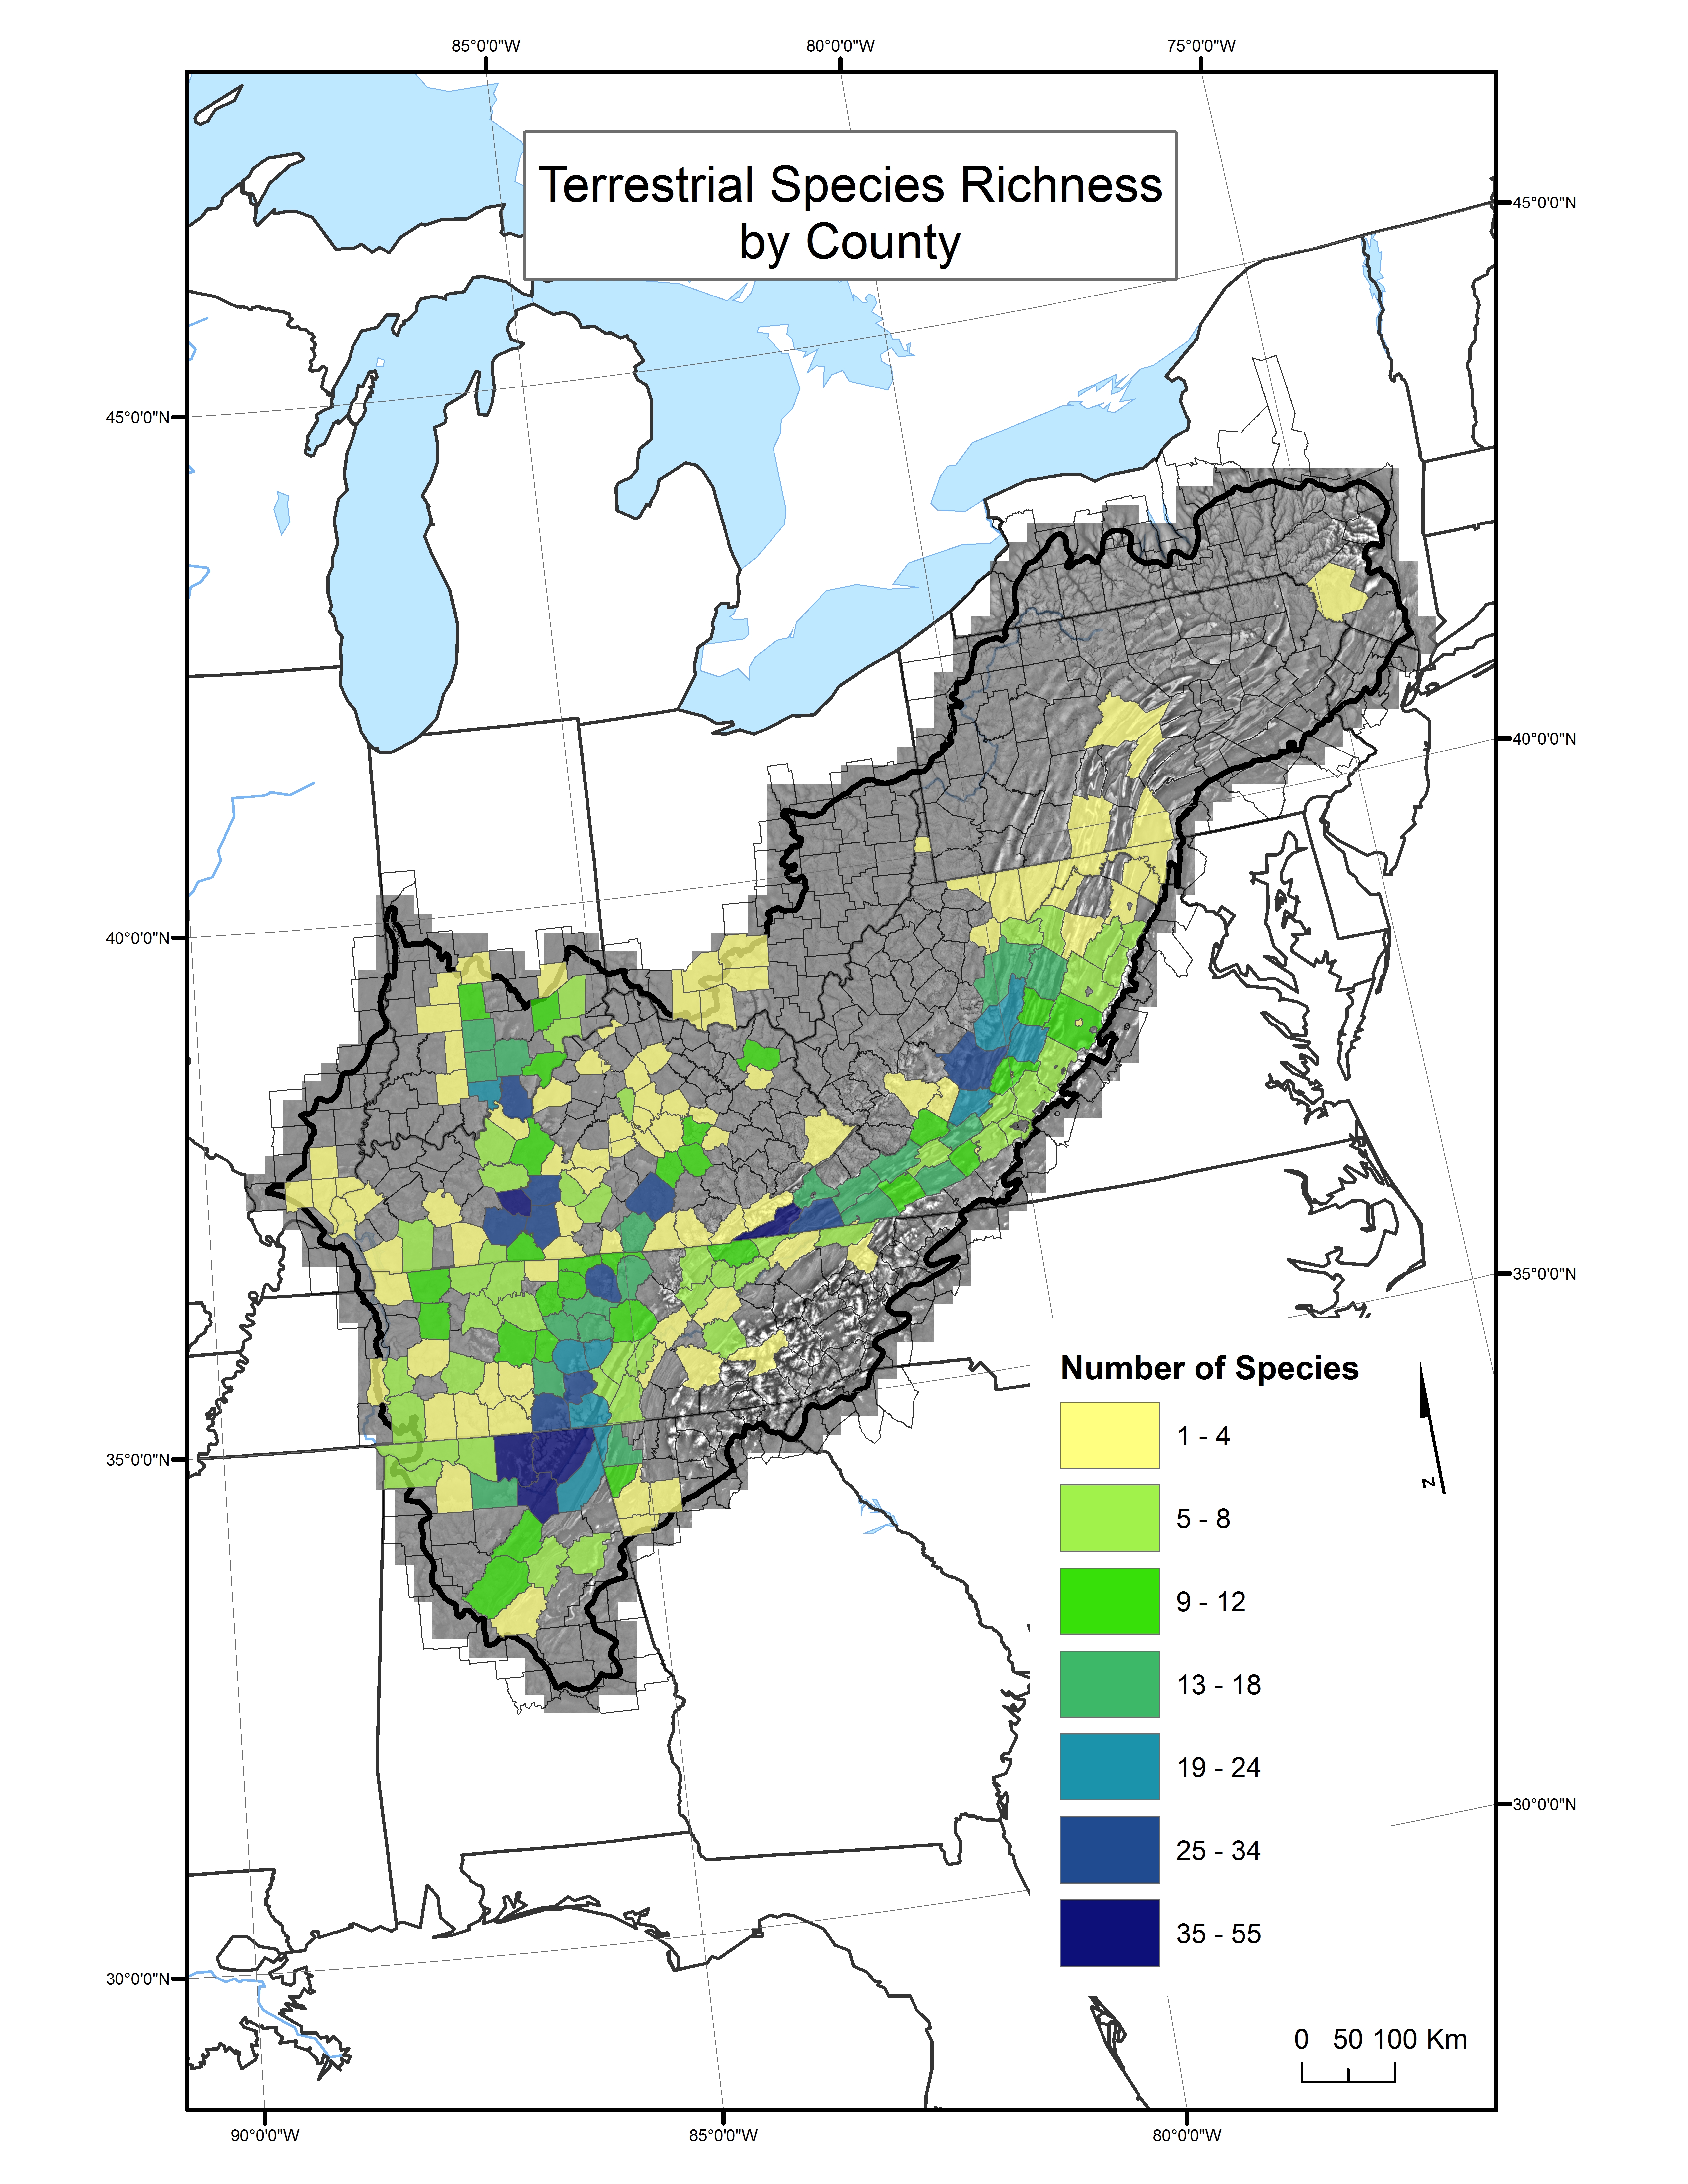 Terrestrial Species Richness by County